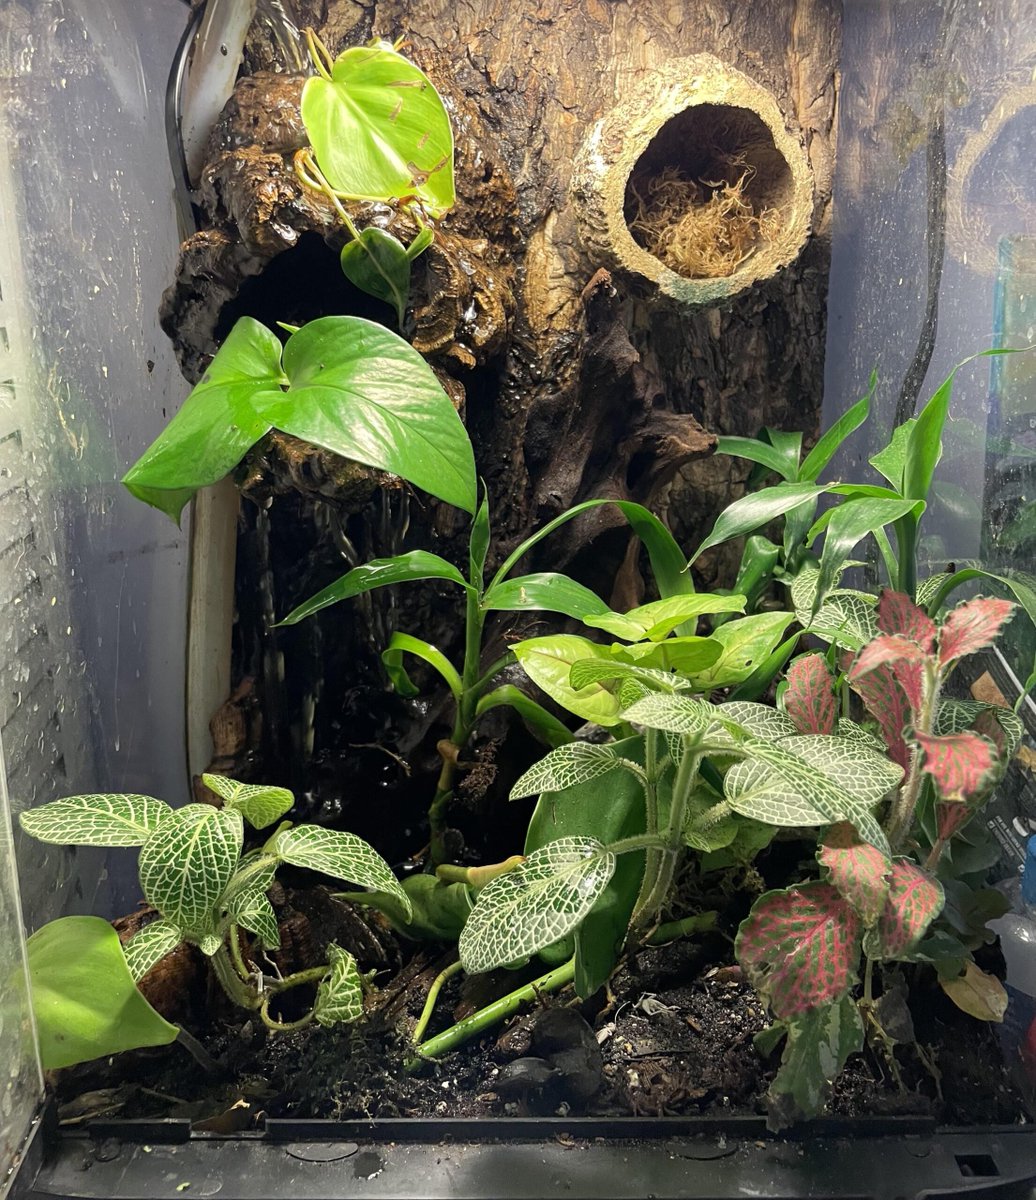 my first waterfall tank. what is it missing? allforgardening.com/849011/my-firs… #HorticultureTerrariums